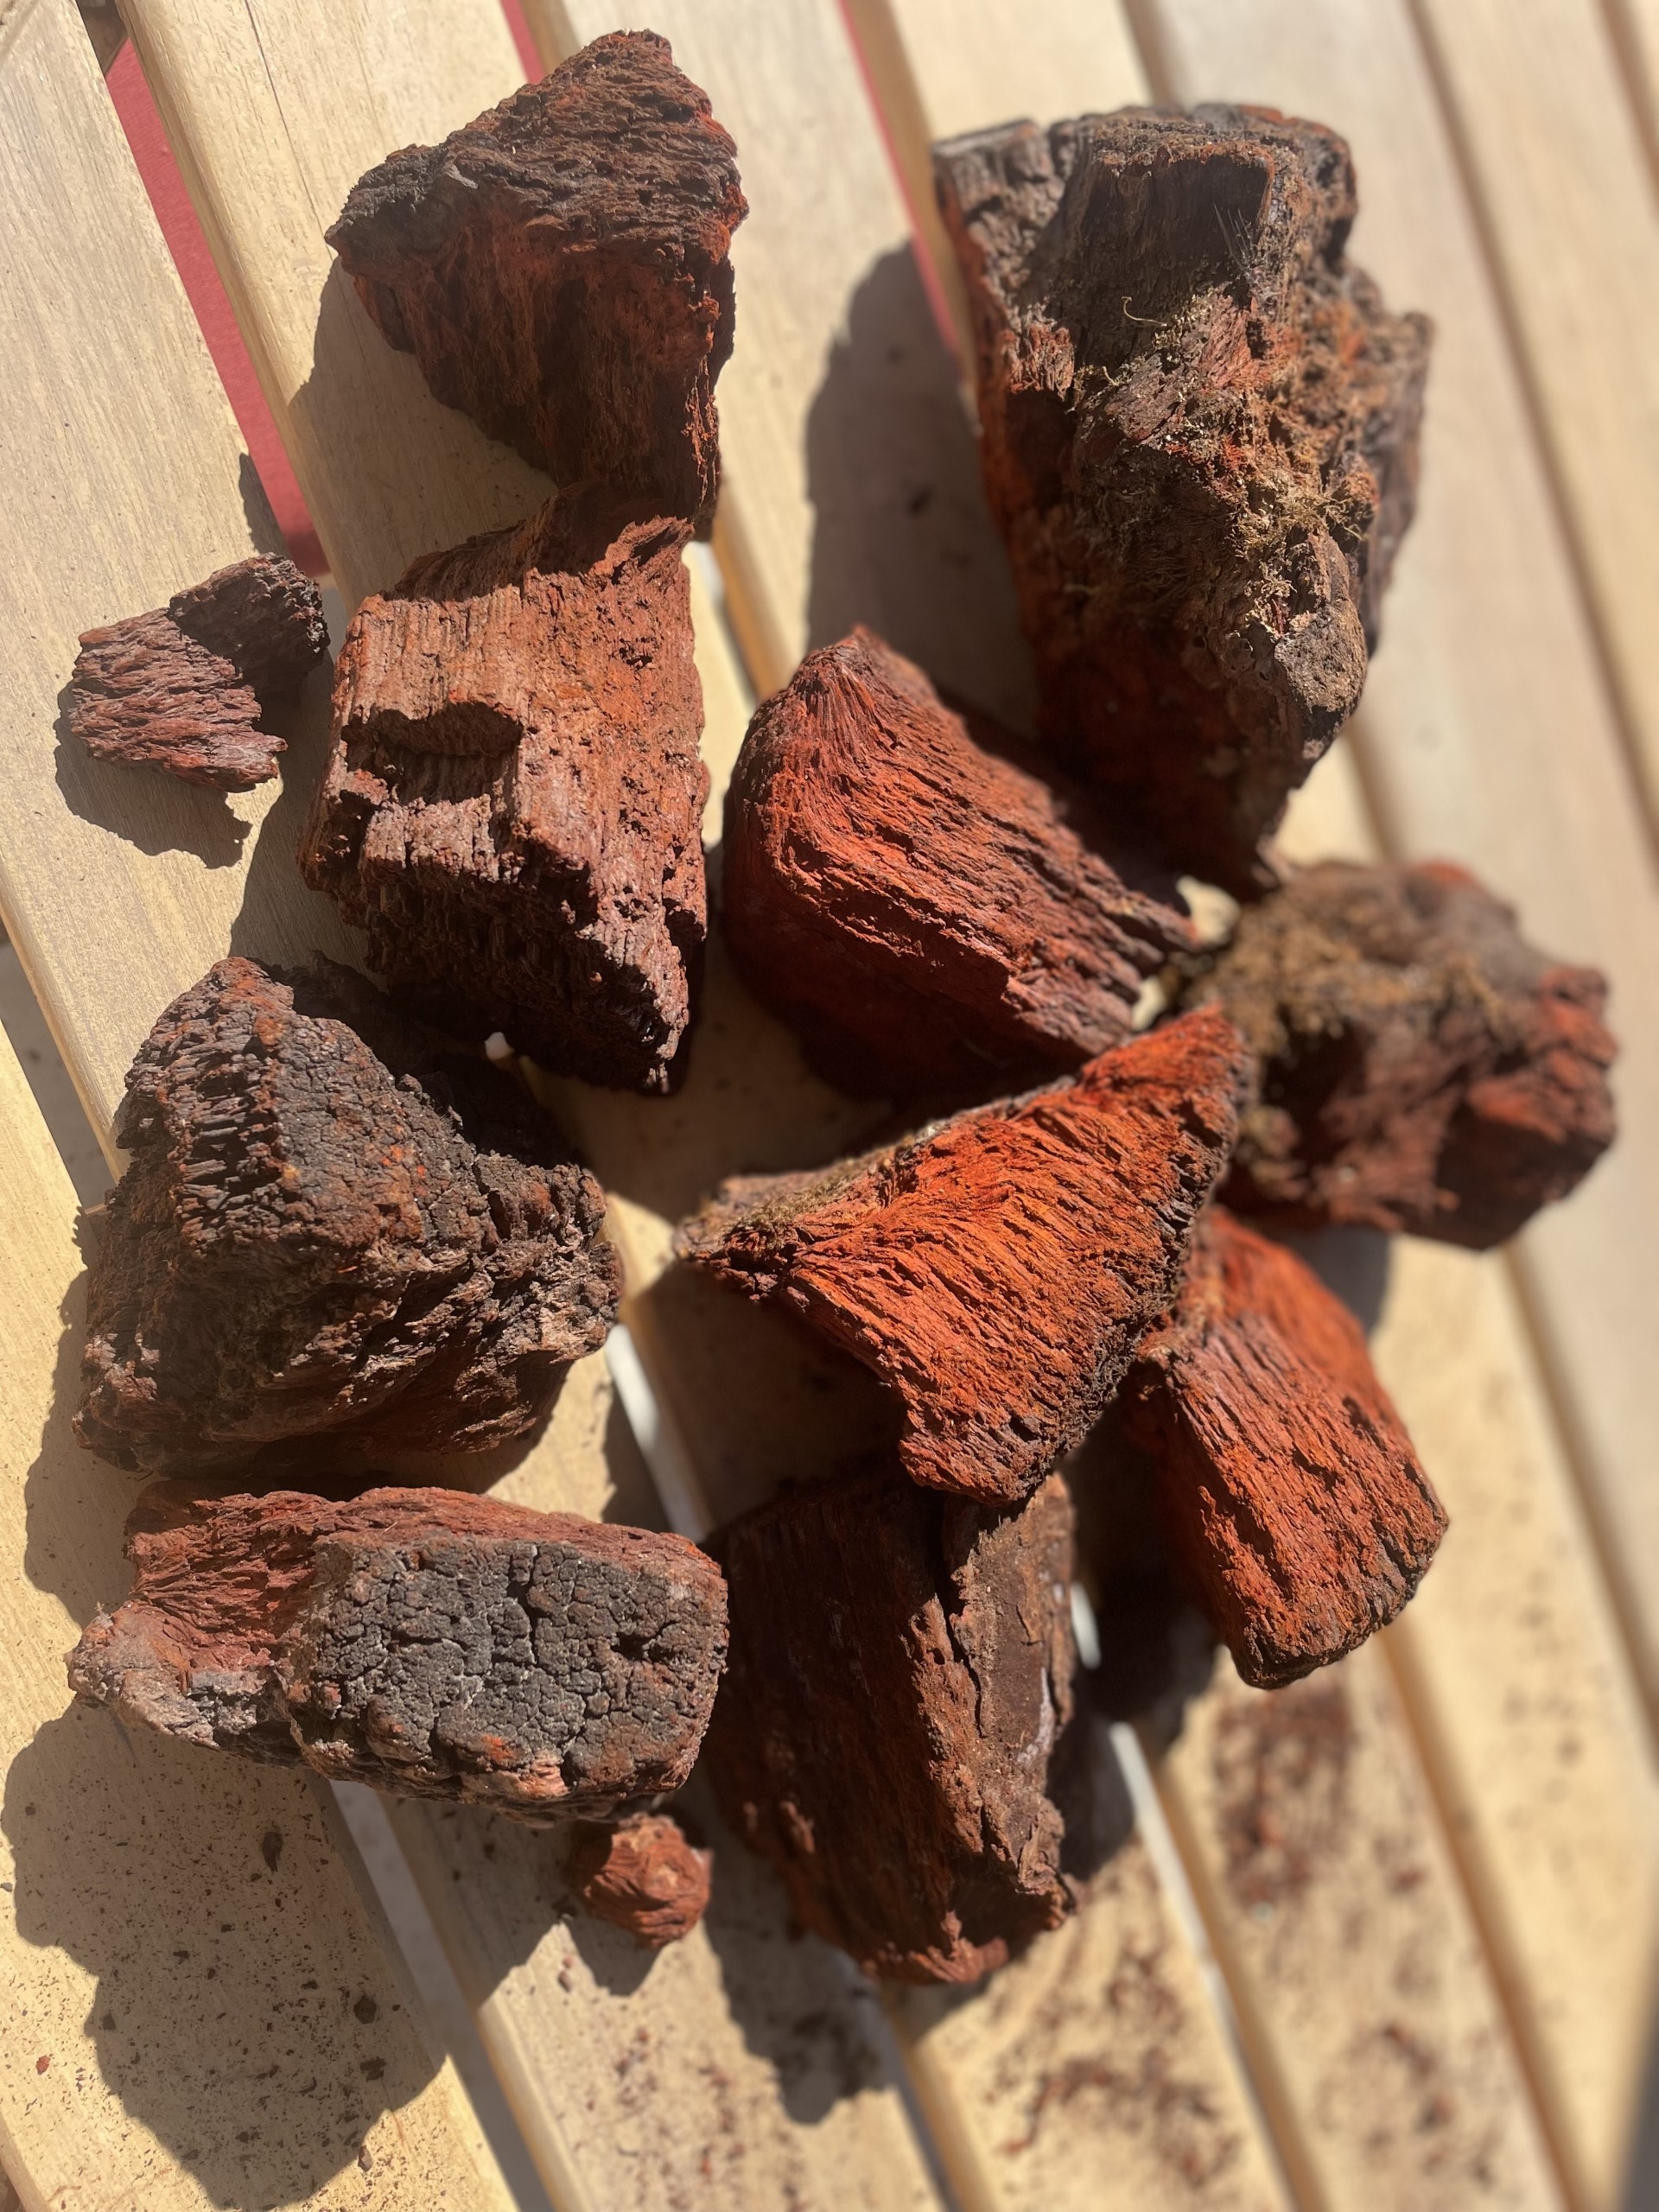 Image of Pieces of a Chaga Mushroom to show coloring